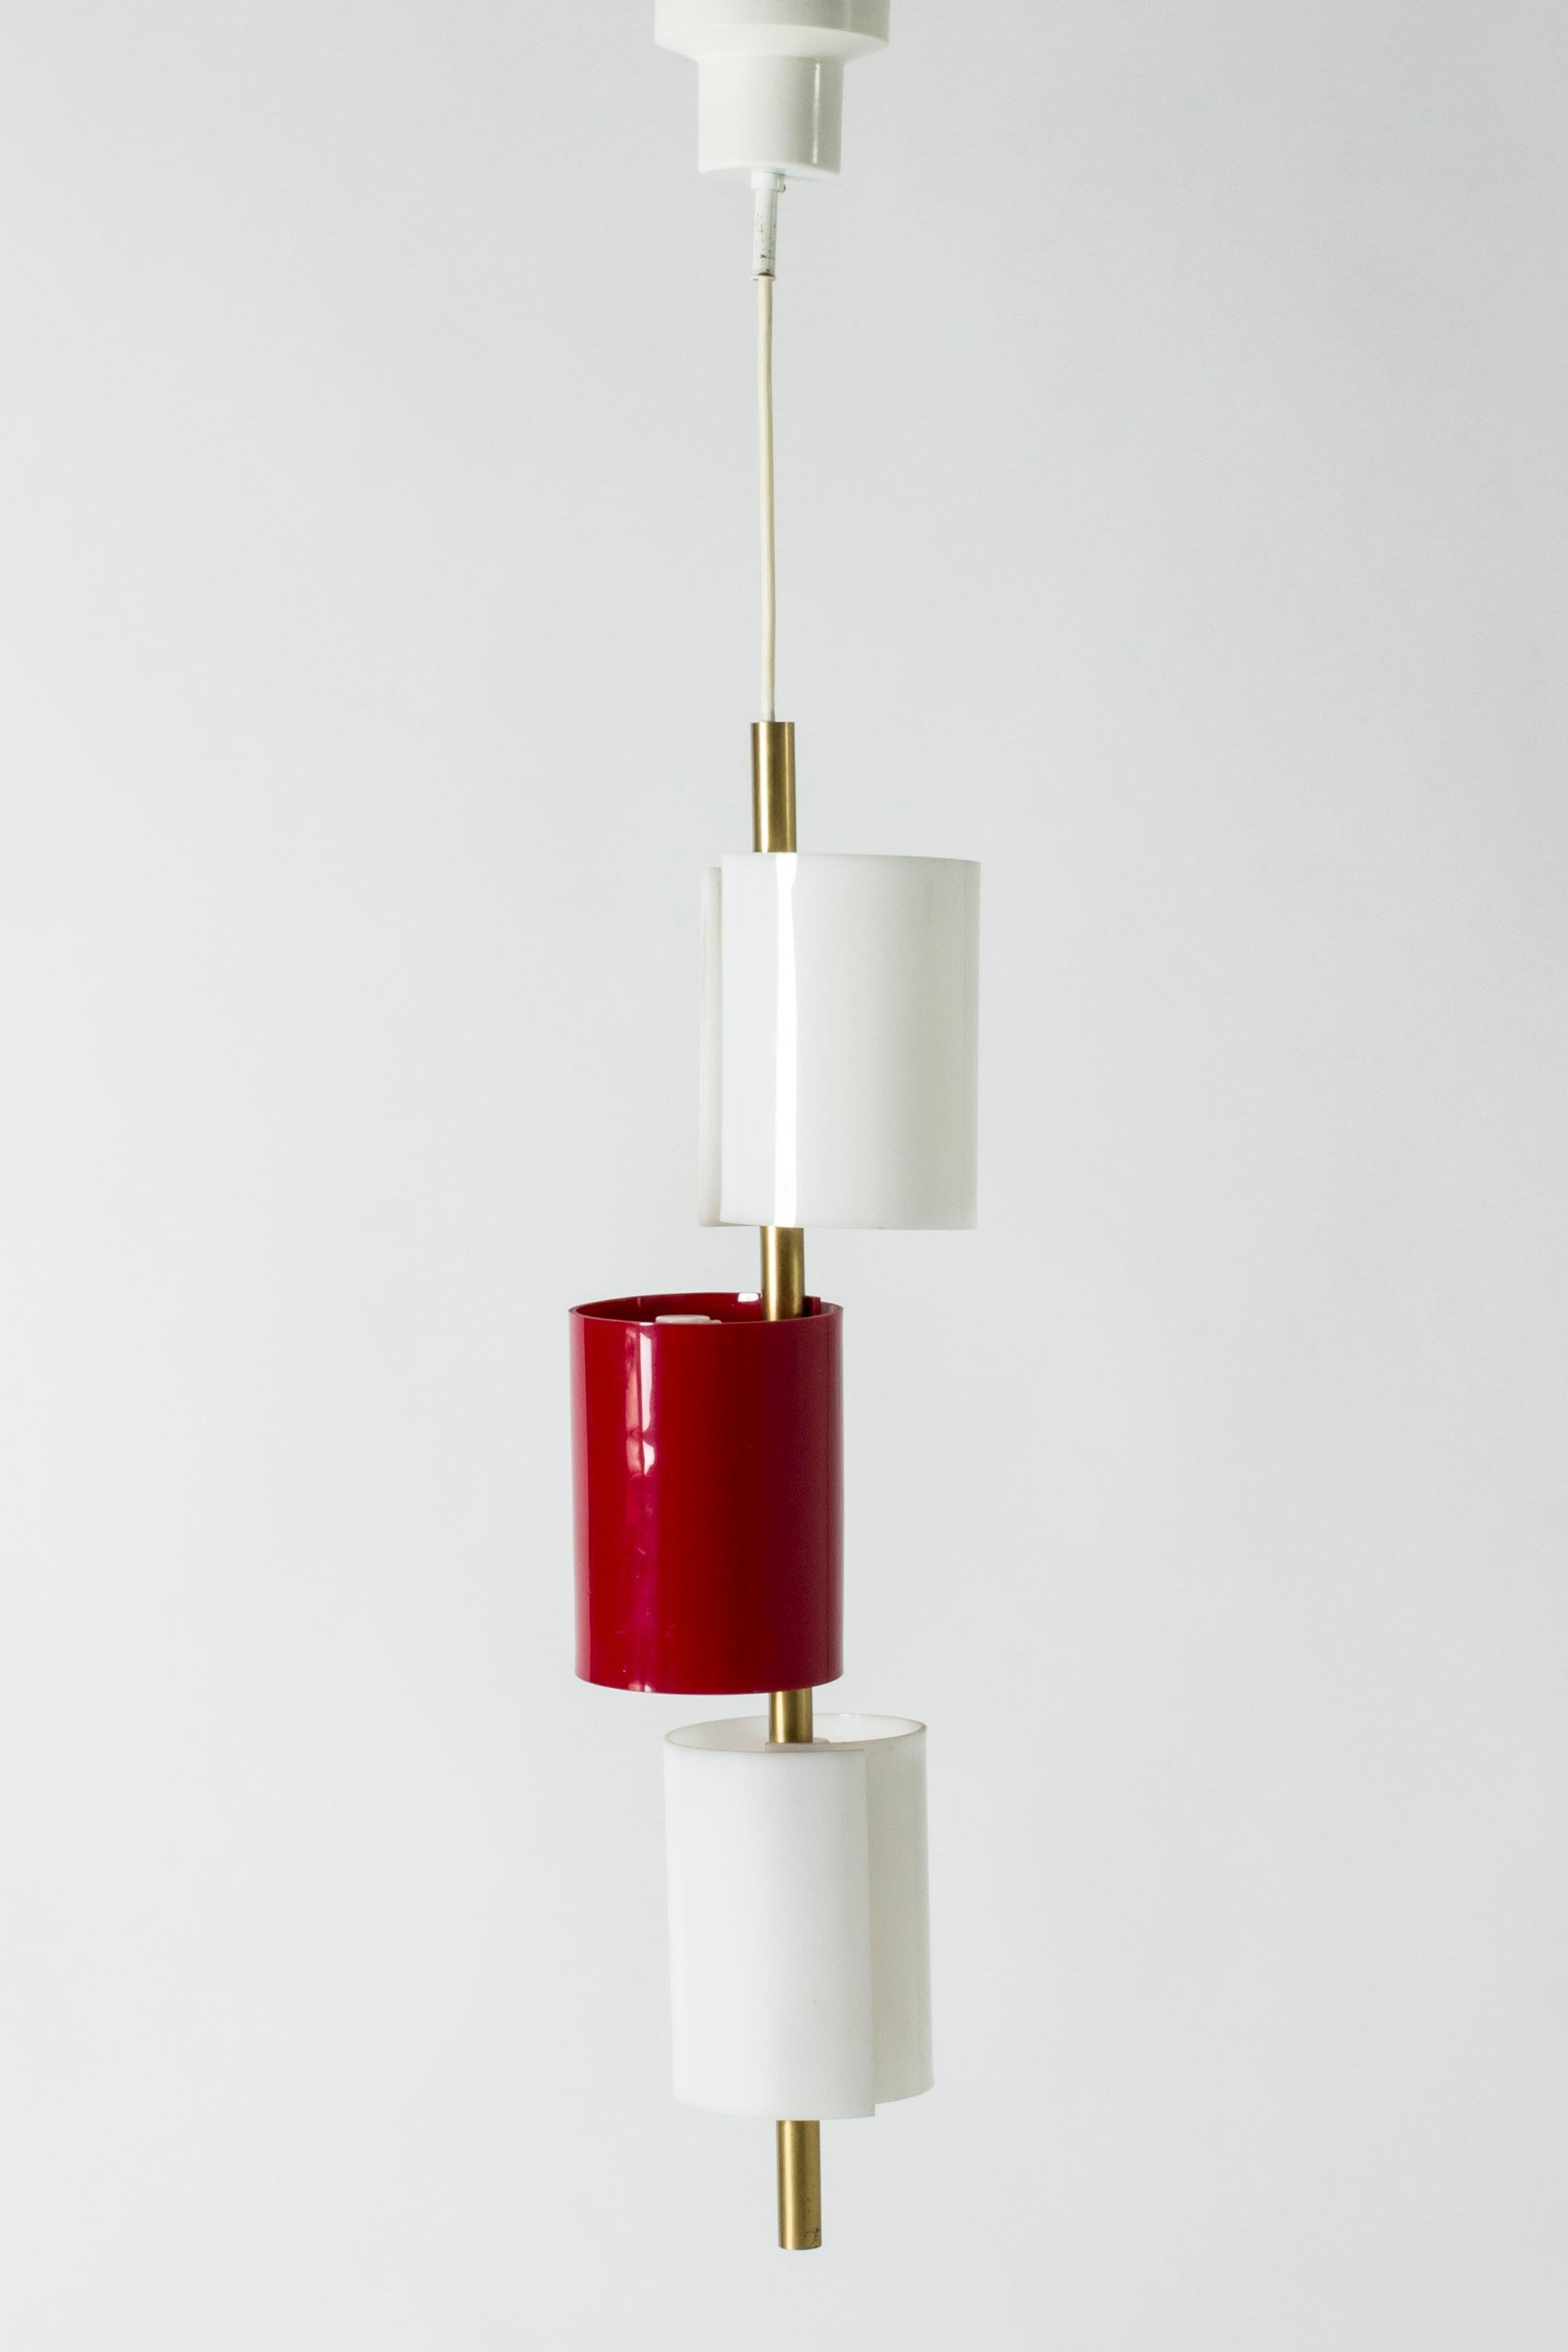 Cool ceiling lamp by Hans Bergström, made from brass with three thick plastic shades, curling into cylinders. White and striking lipstick red.

Hans Bergström was the owner and creative director of the lighting firm Ateljé Lyktan, which he founded